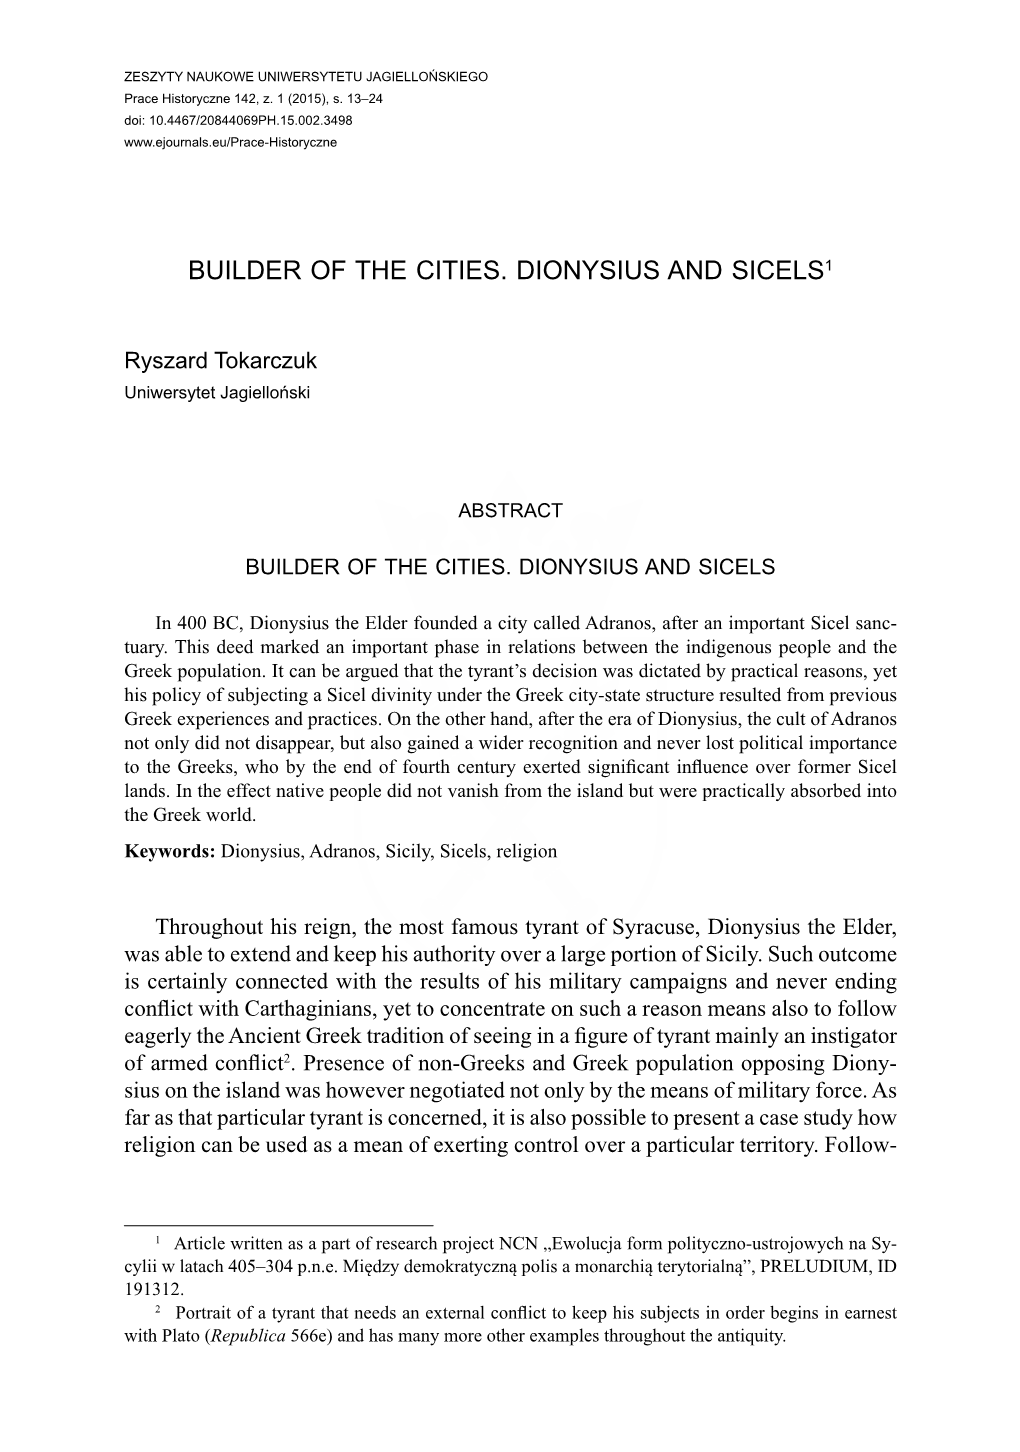 Builder of the Cities. Dionysius and Sicels1